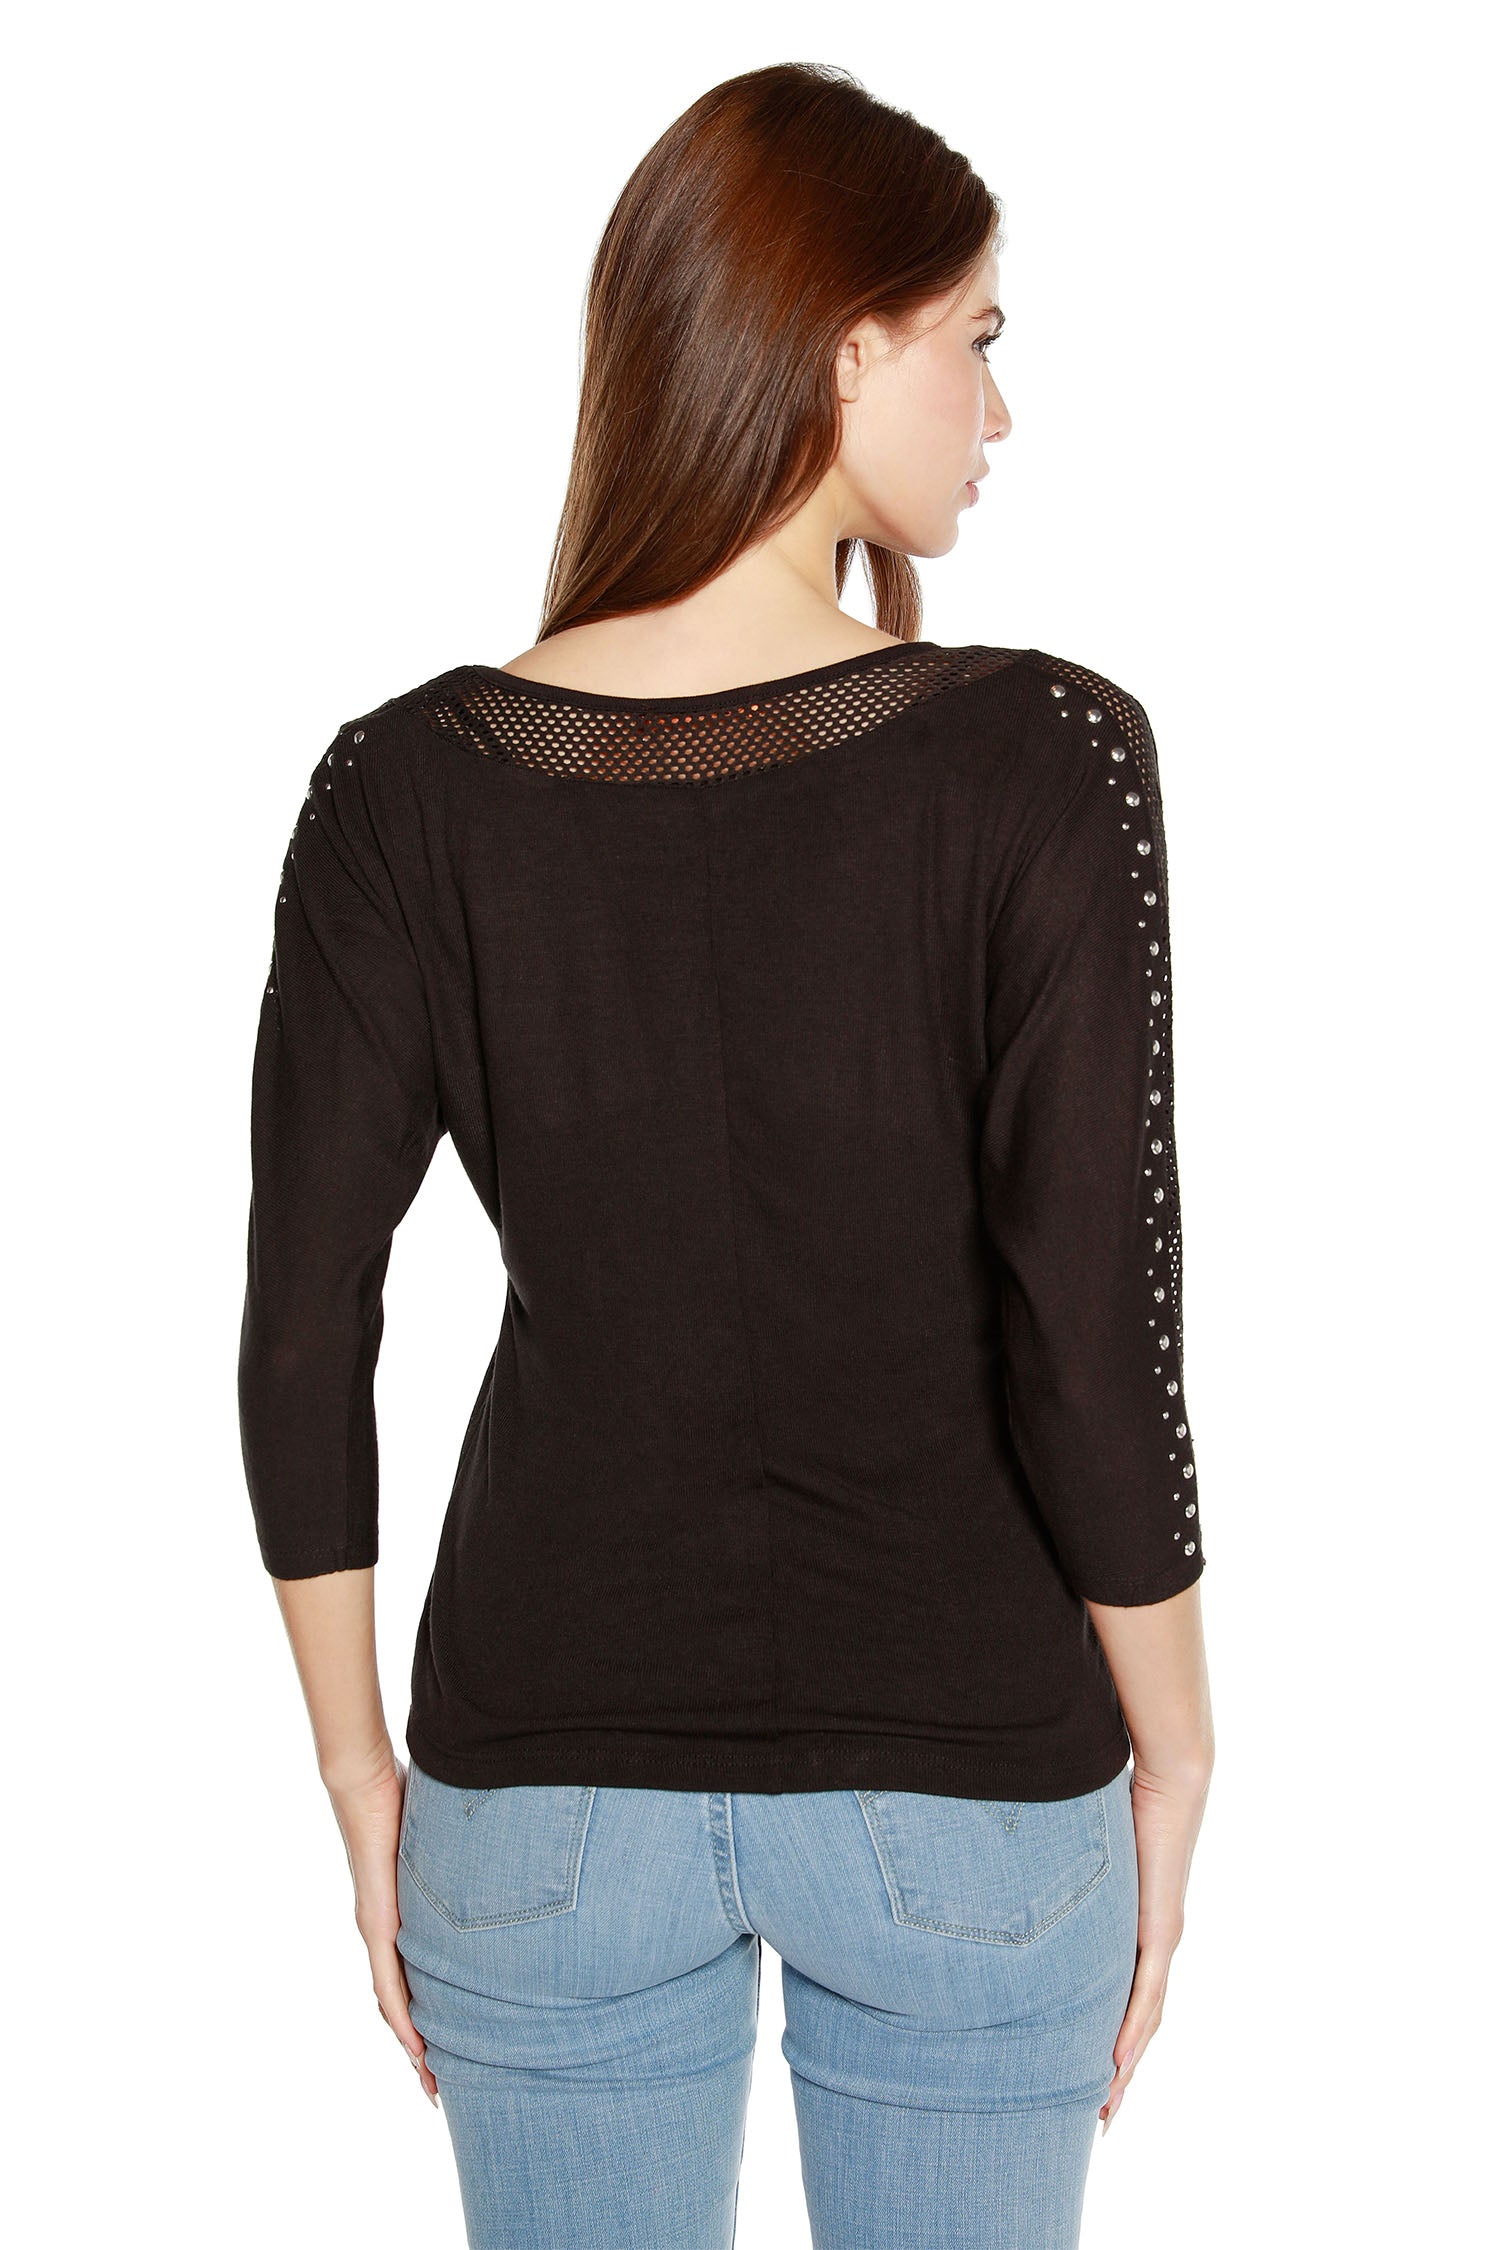 Women's Dolman Sleeve Top with Mesh Detail and Nailhead Embellishments